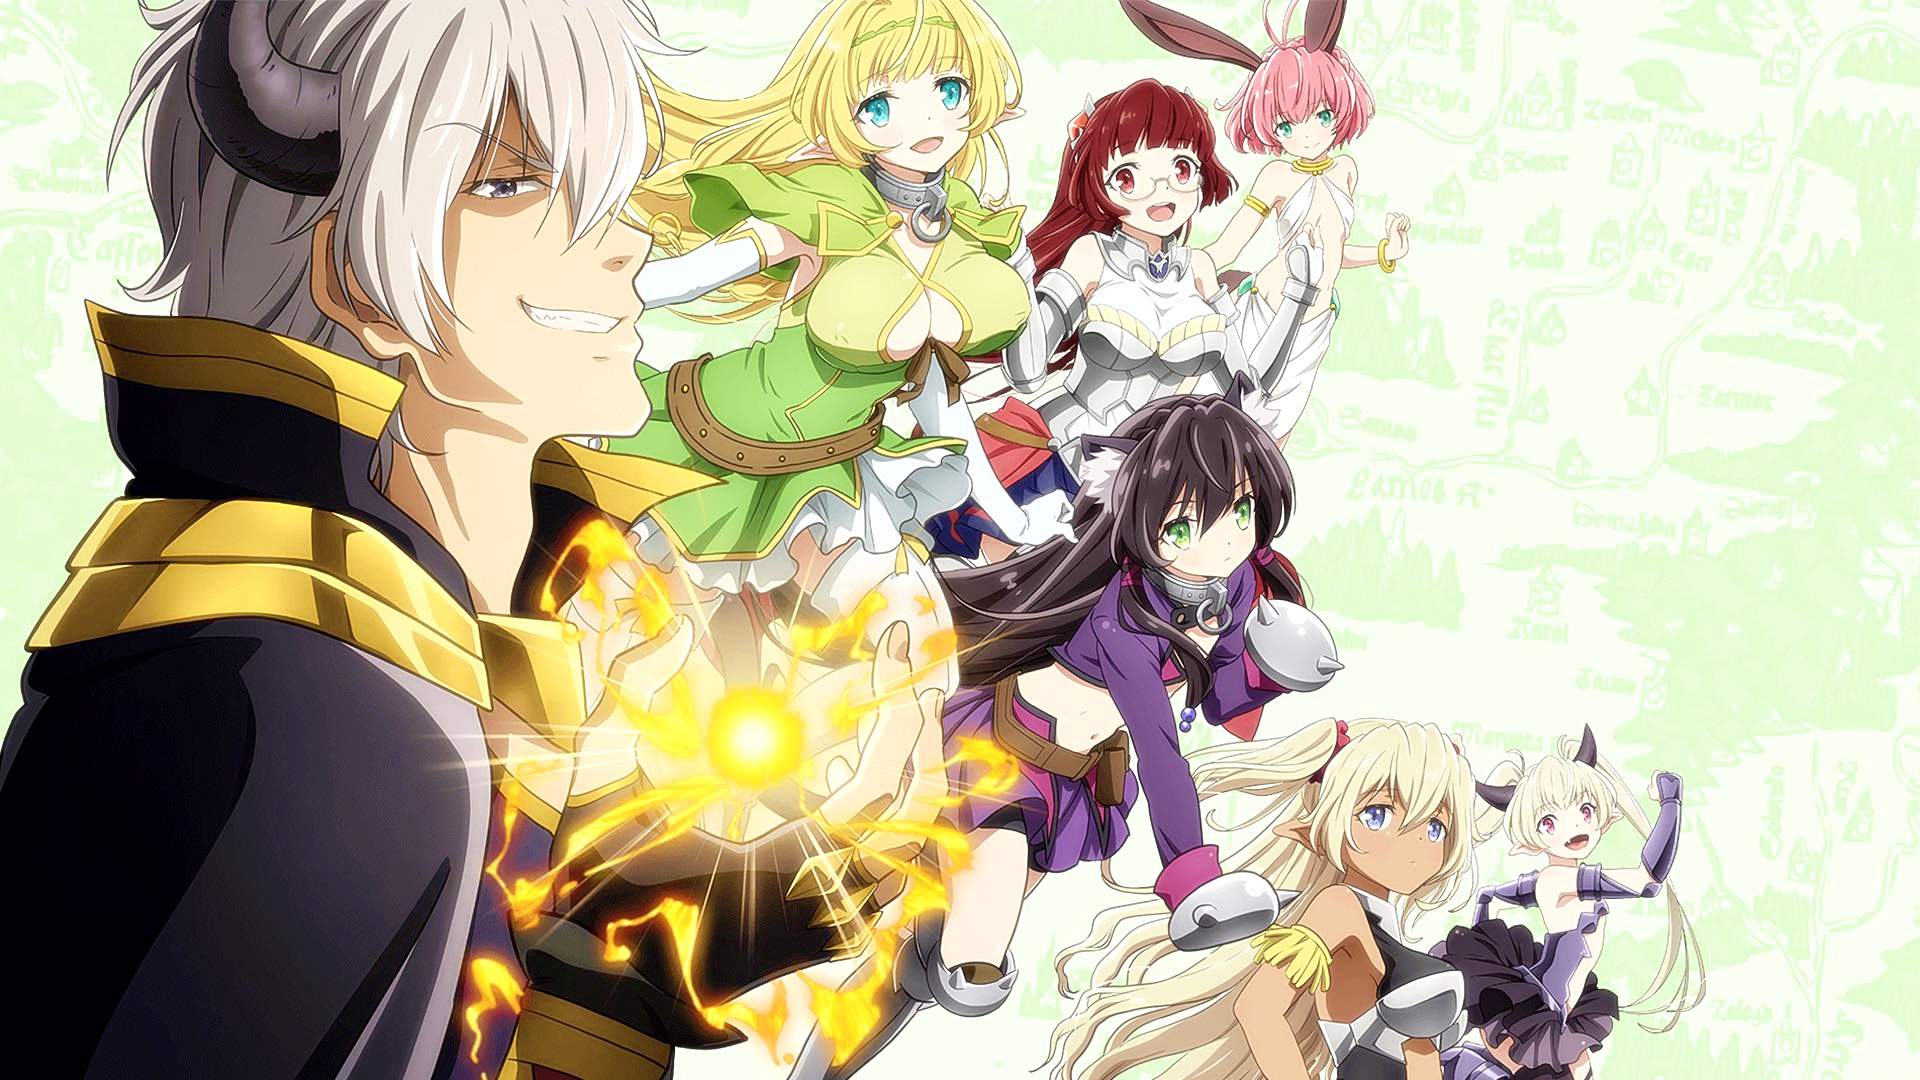 How Not To Summon A Demon Lord Season 1 Review Anime TLDR.com